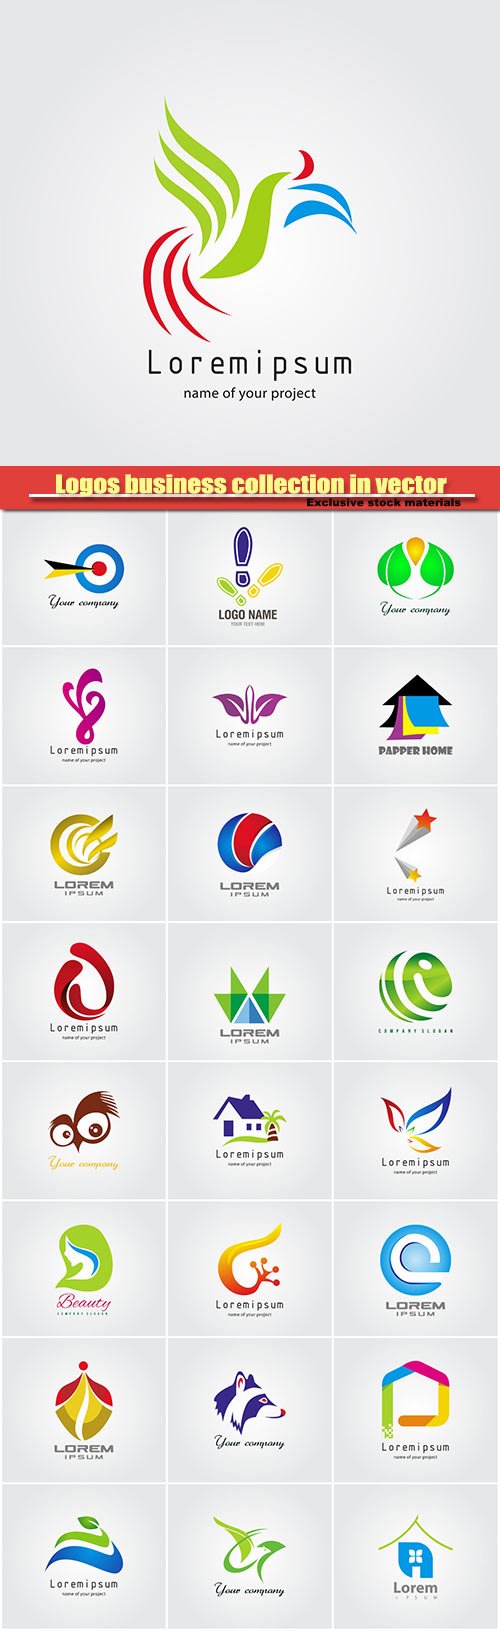 Logos business collection in vector #11